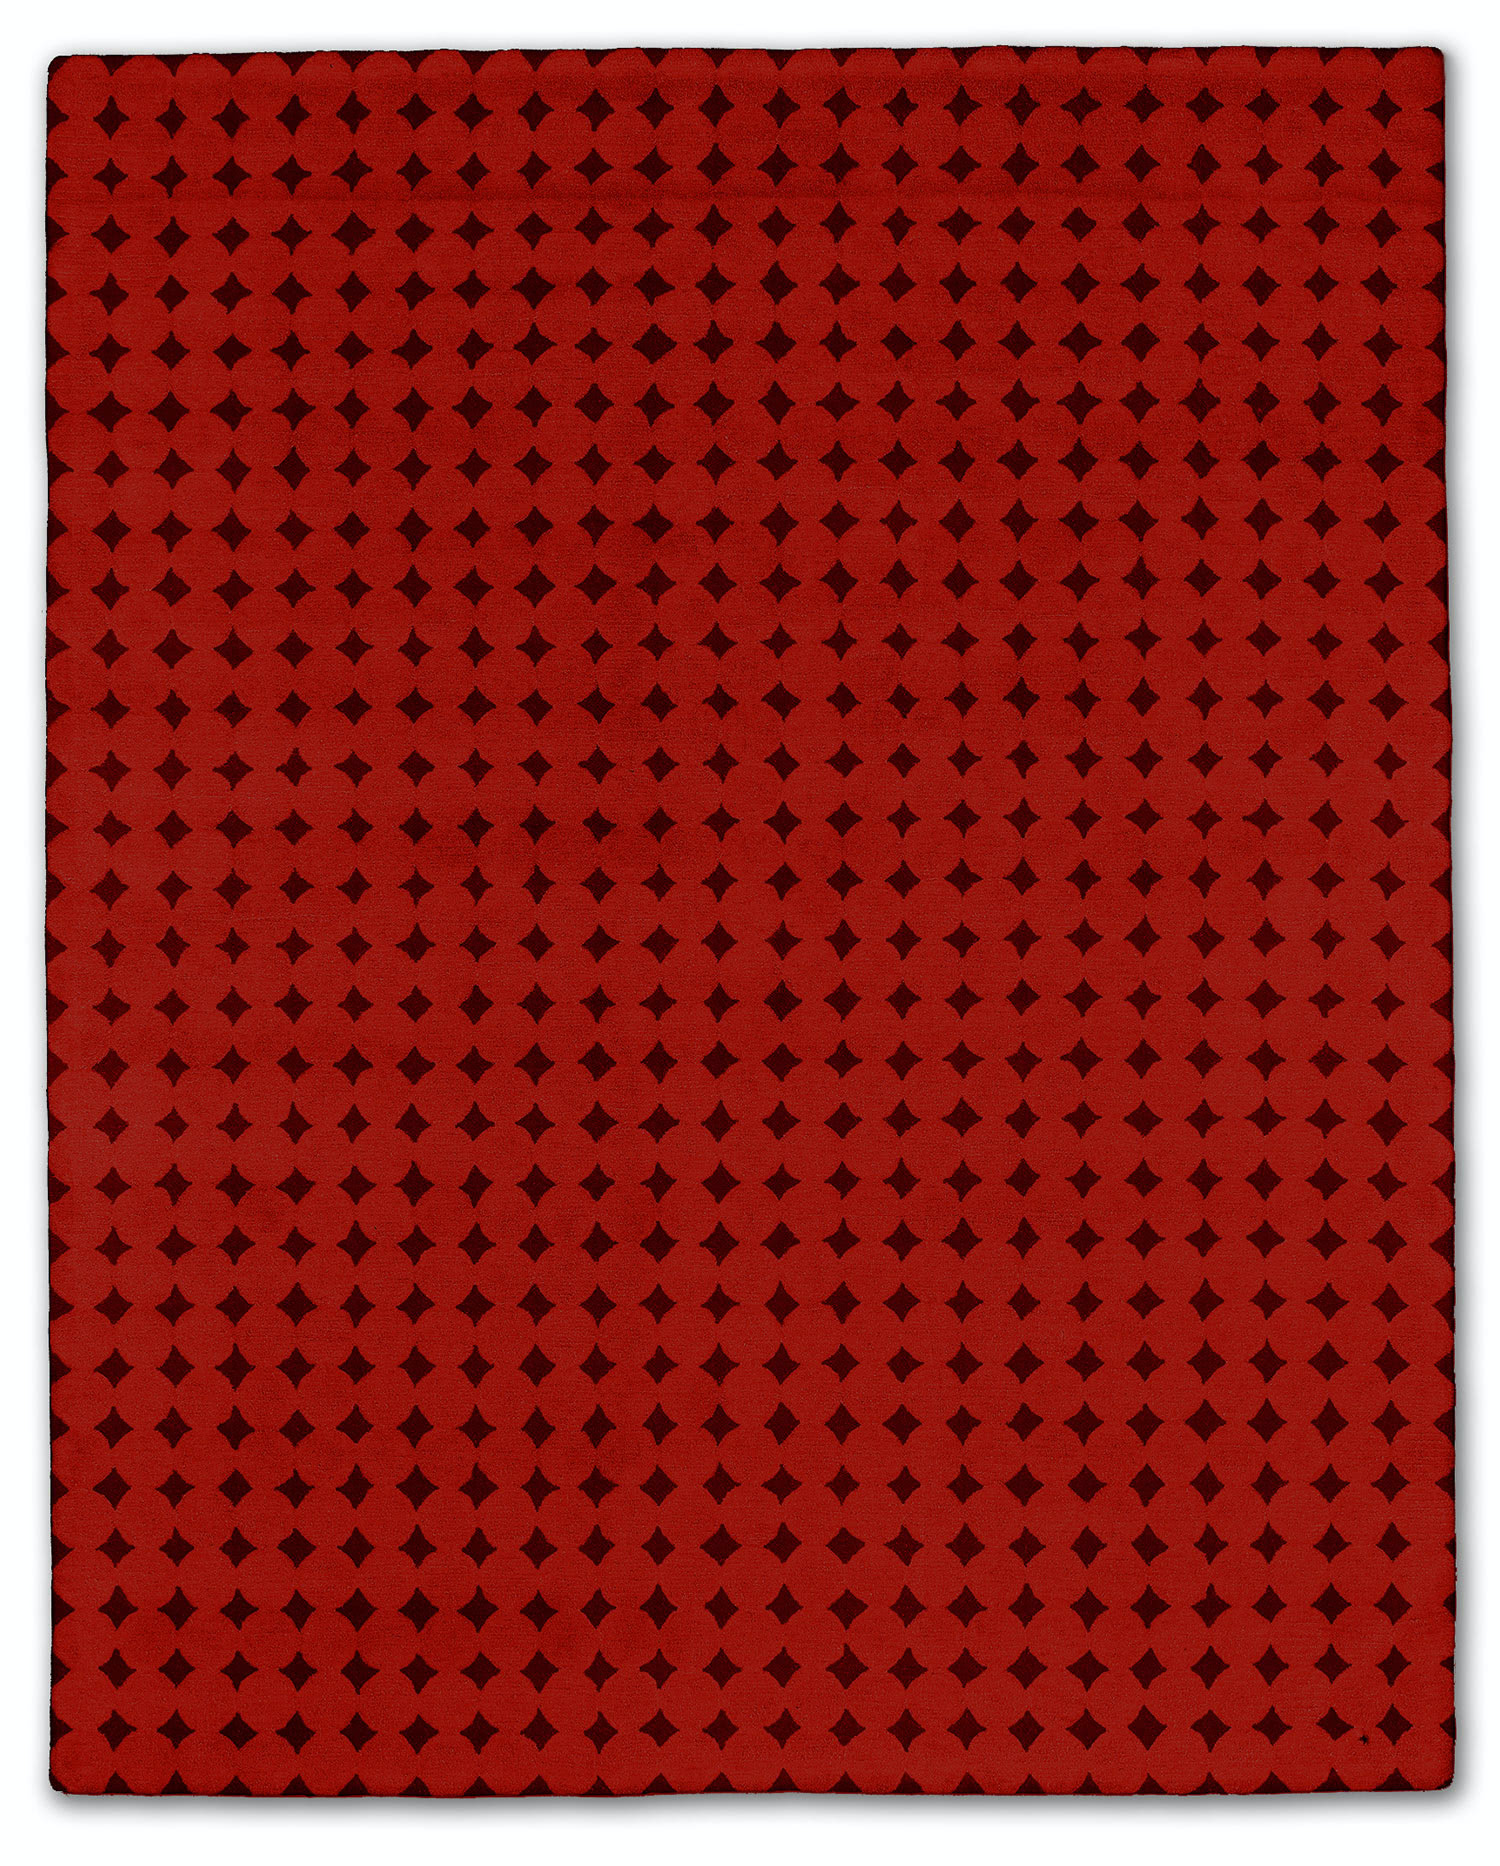 An 8 by 10 foot red rug called Bongo Passion